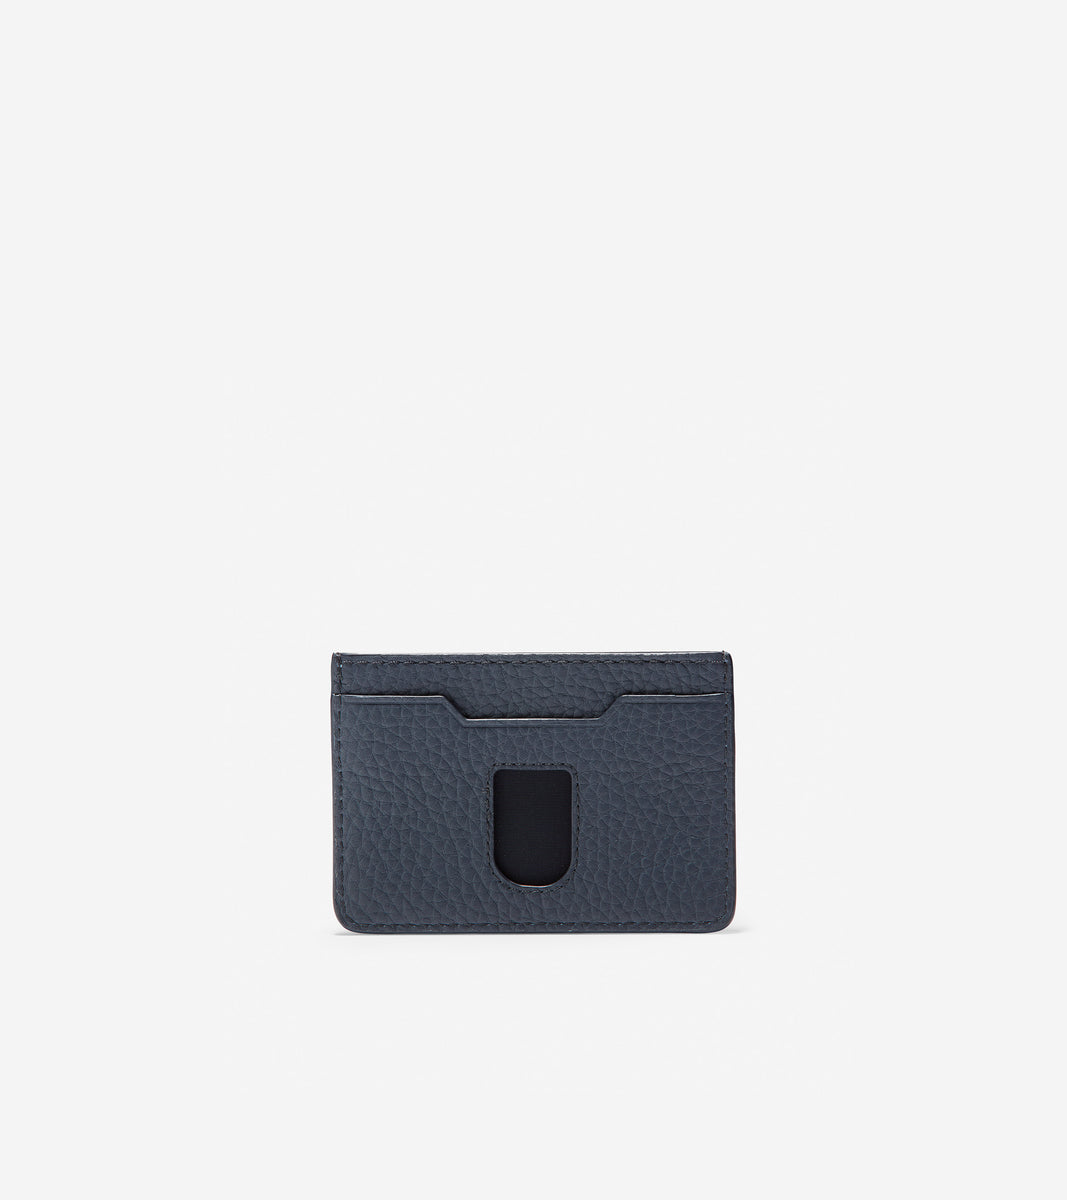 ColeHaan-GRANDSERIES Pebbled Leather Card Case-f11369-Default Title